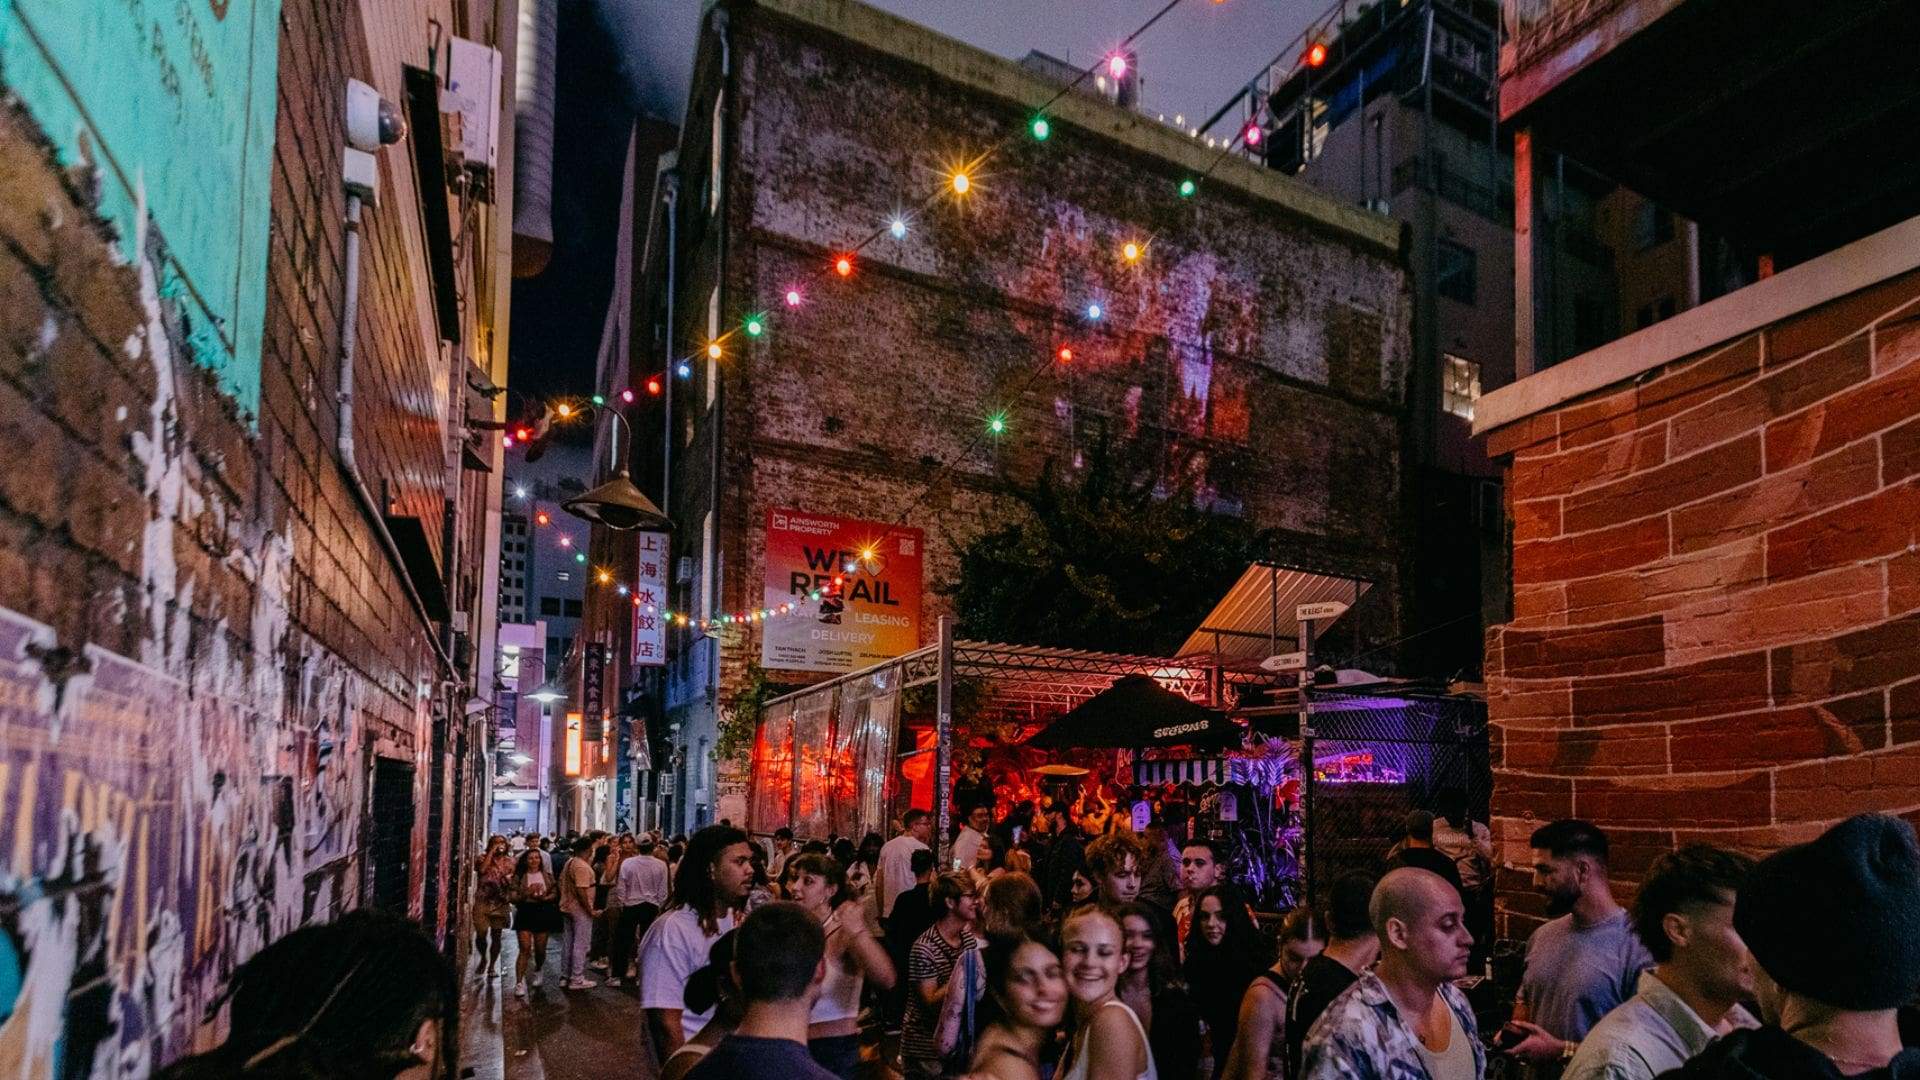 Section 8 - one of the best Melbourne bars for dancing